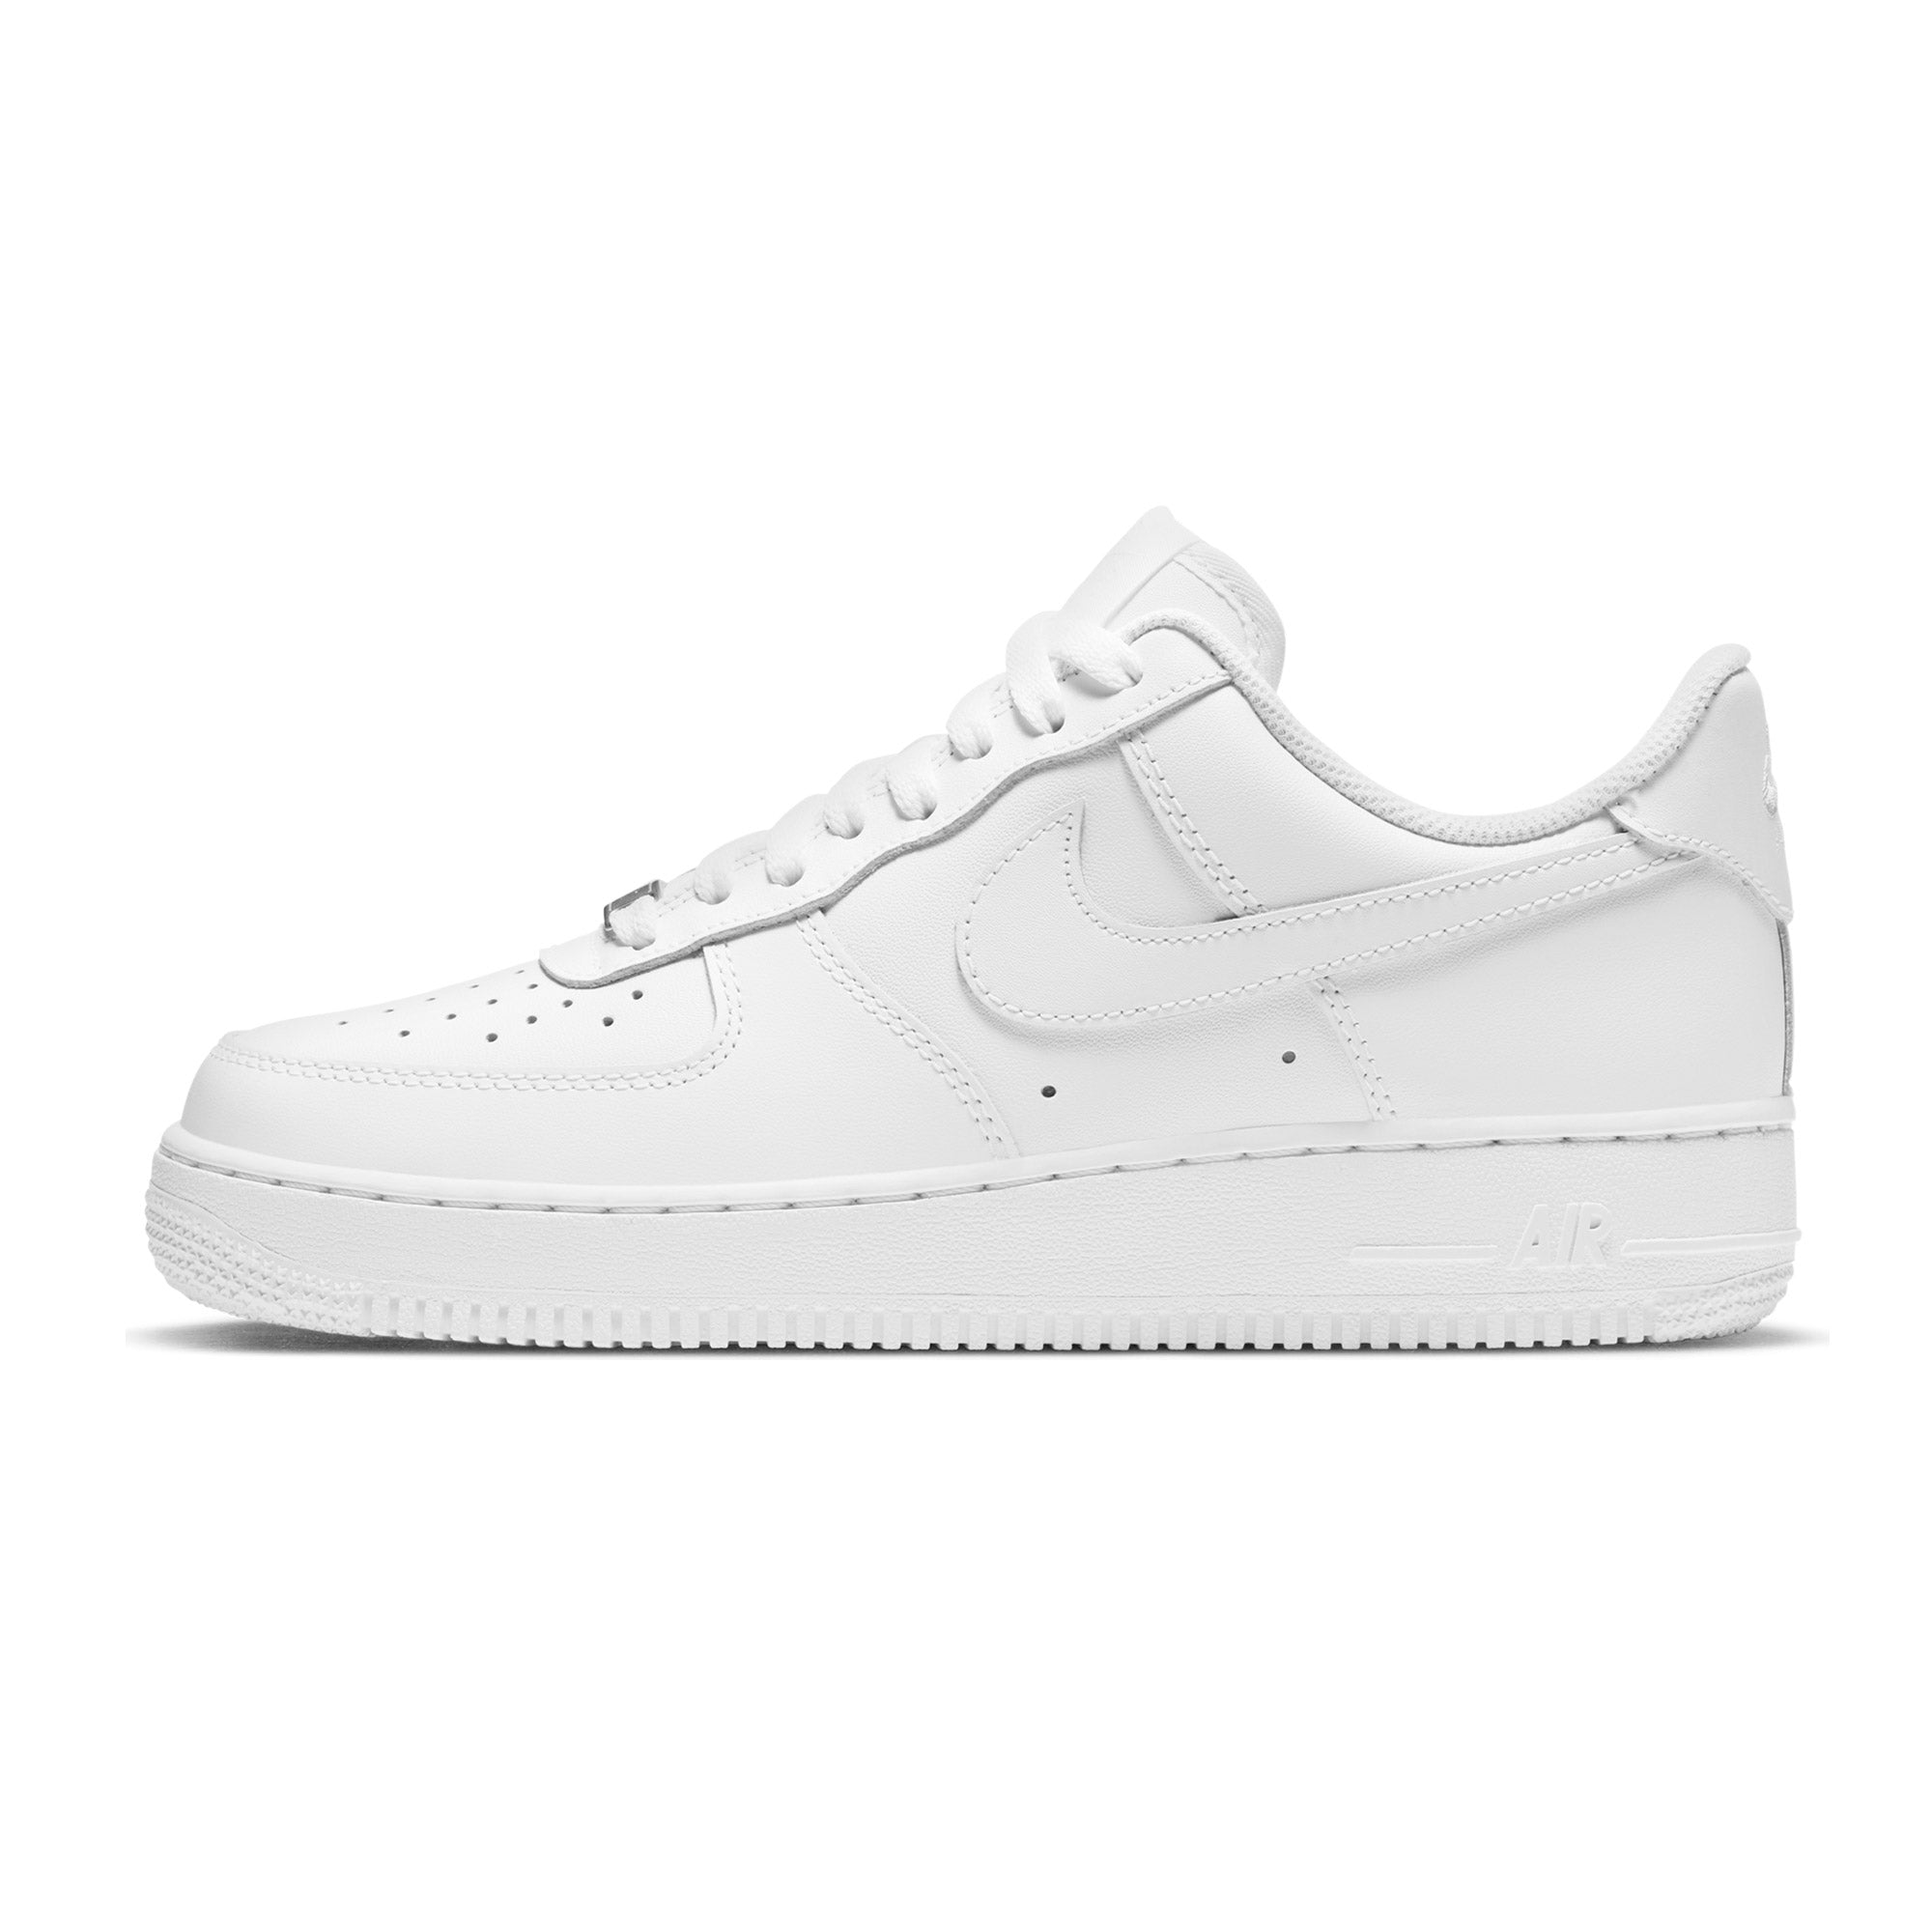 Nike Air Force 1 '07 LV8 2 Mens sizes: 8-13 Available now in store